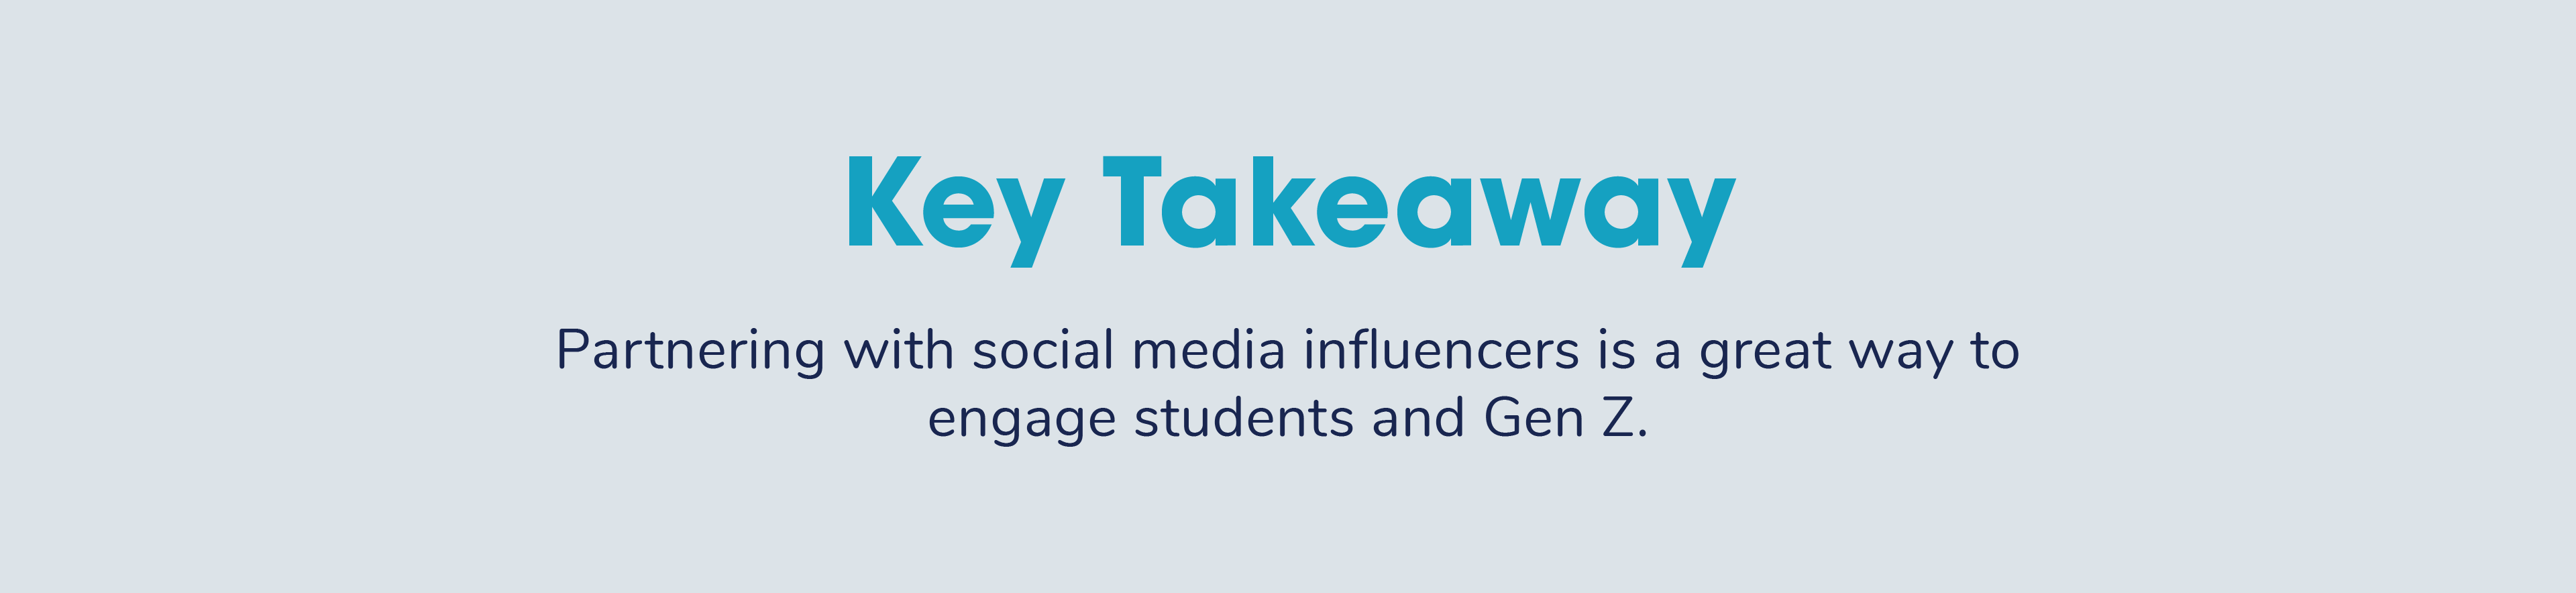 Partnering with social media influencers is a great way to engage Gen Z.